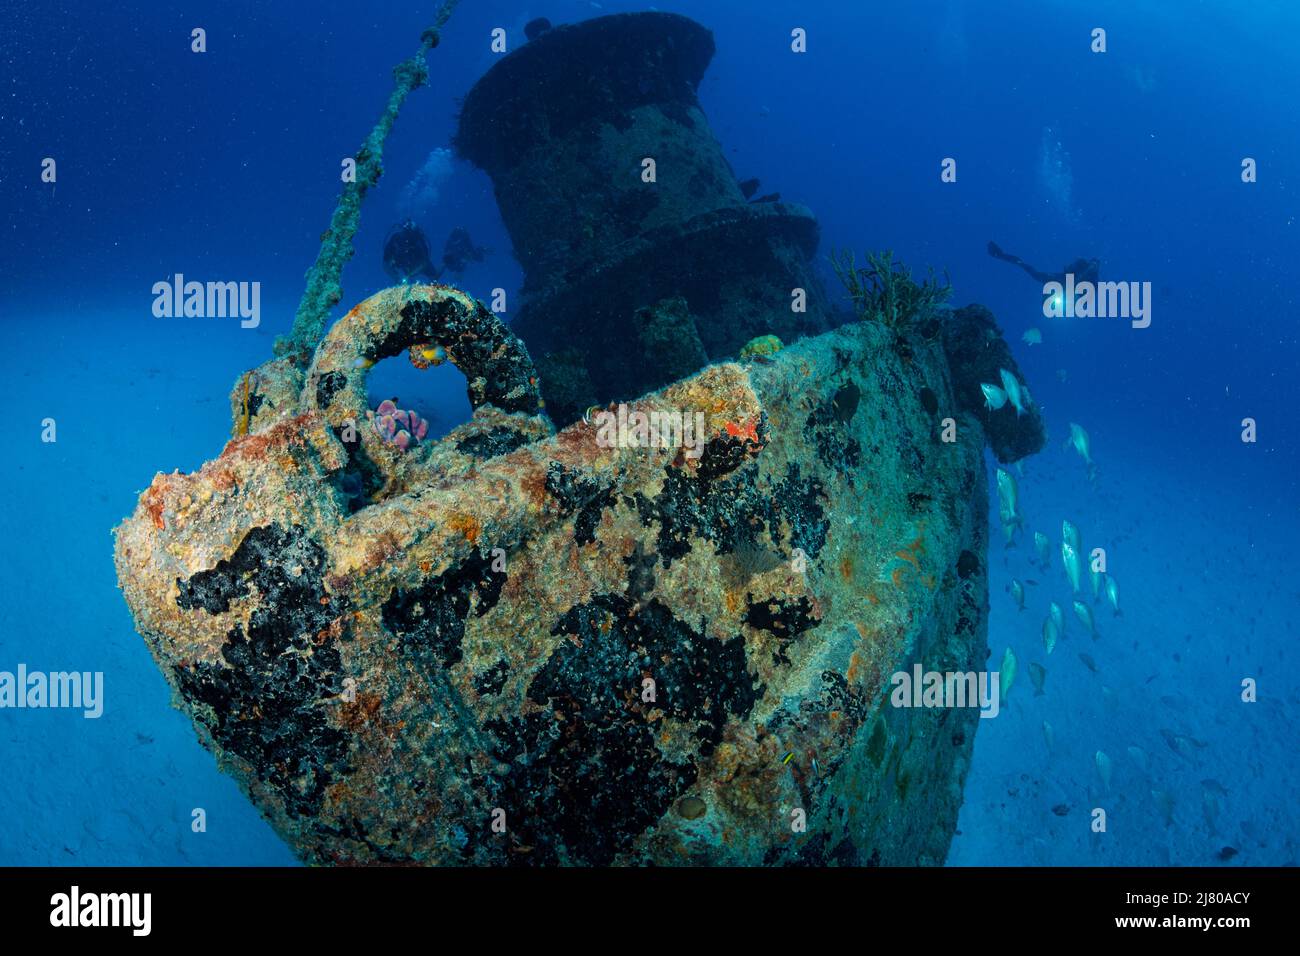 Diver on the wreck of the Porpoise off the Dutch Caribbean island of Sint Maarten Stock Photo